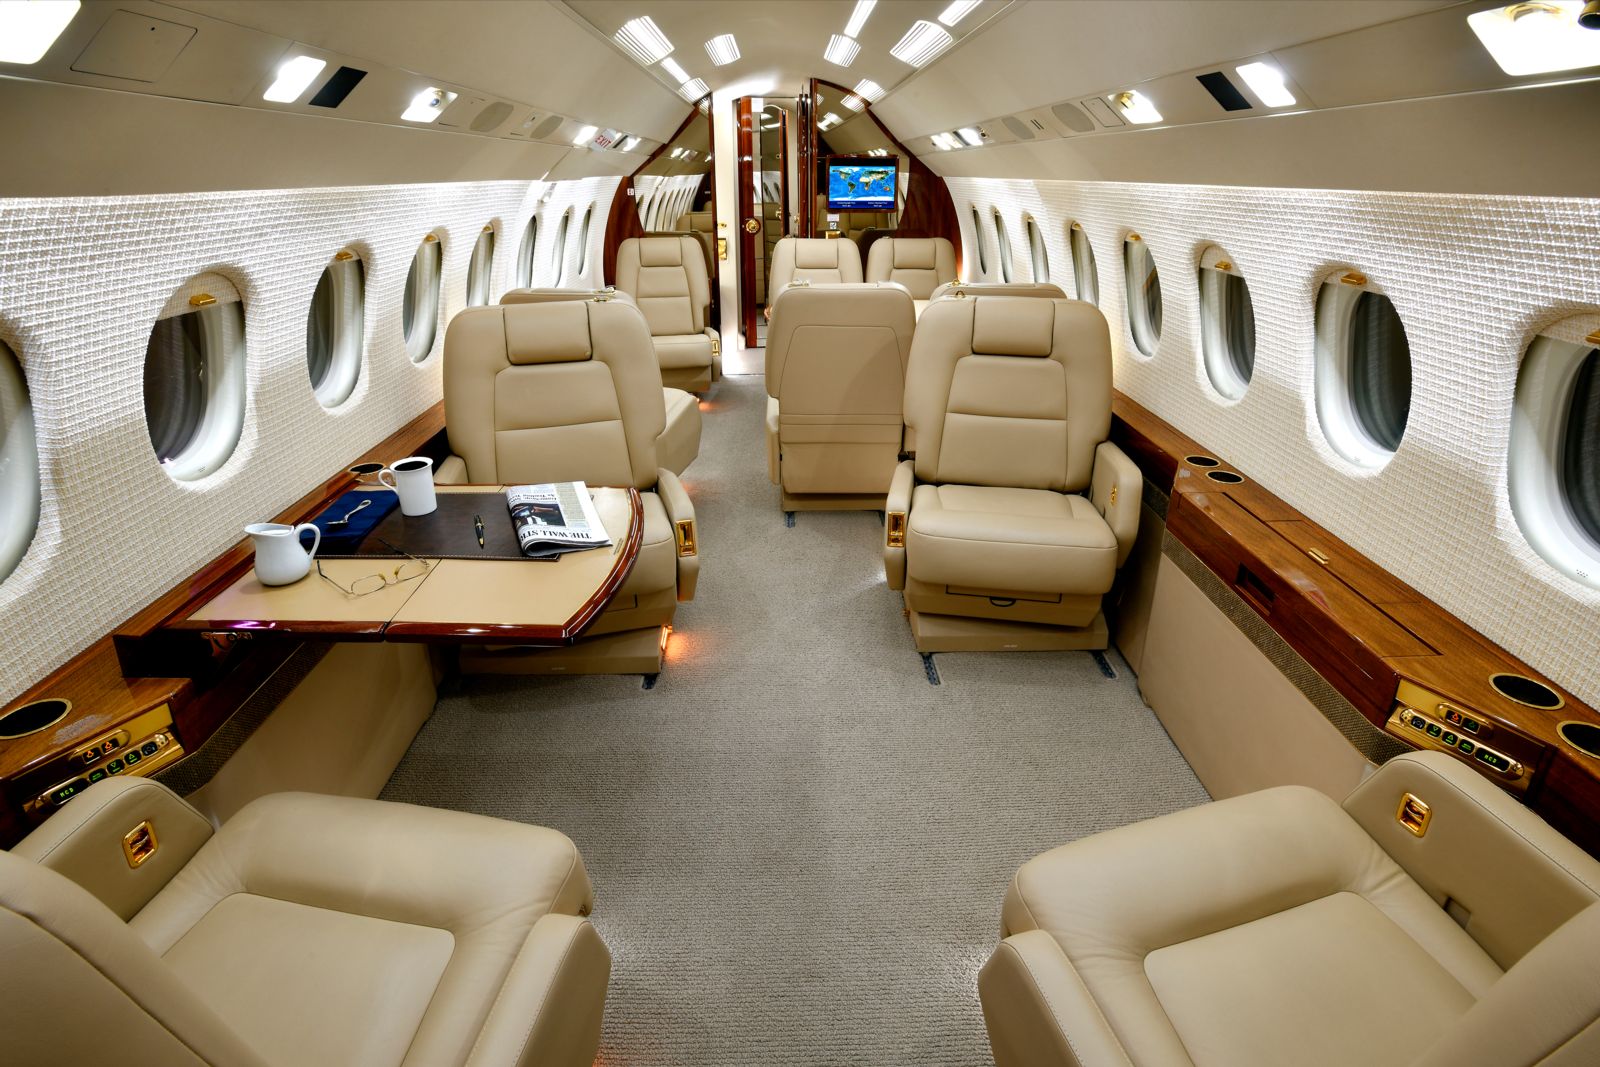 Dassault Falcon 2000EX  S/N 12 for sale | gallery image: /userfiles/files/int1b_300.jpg